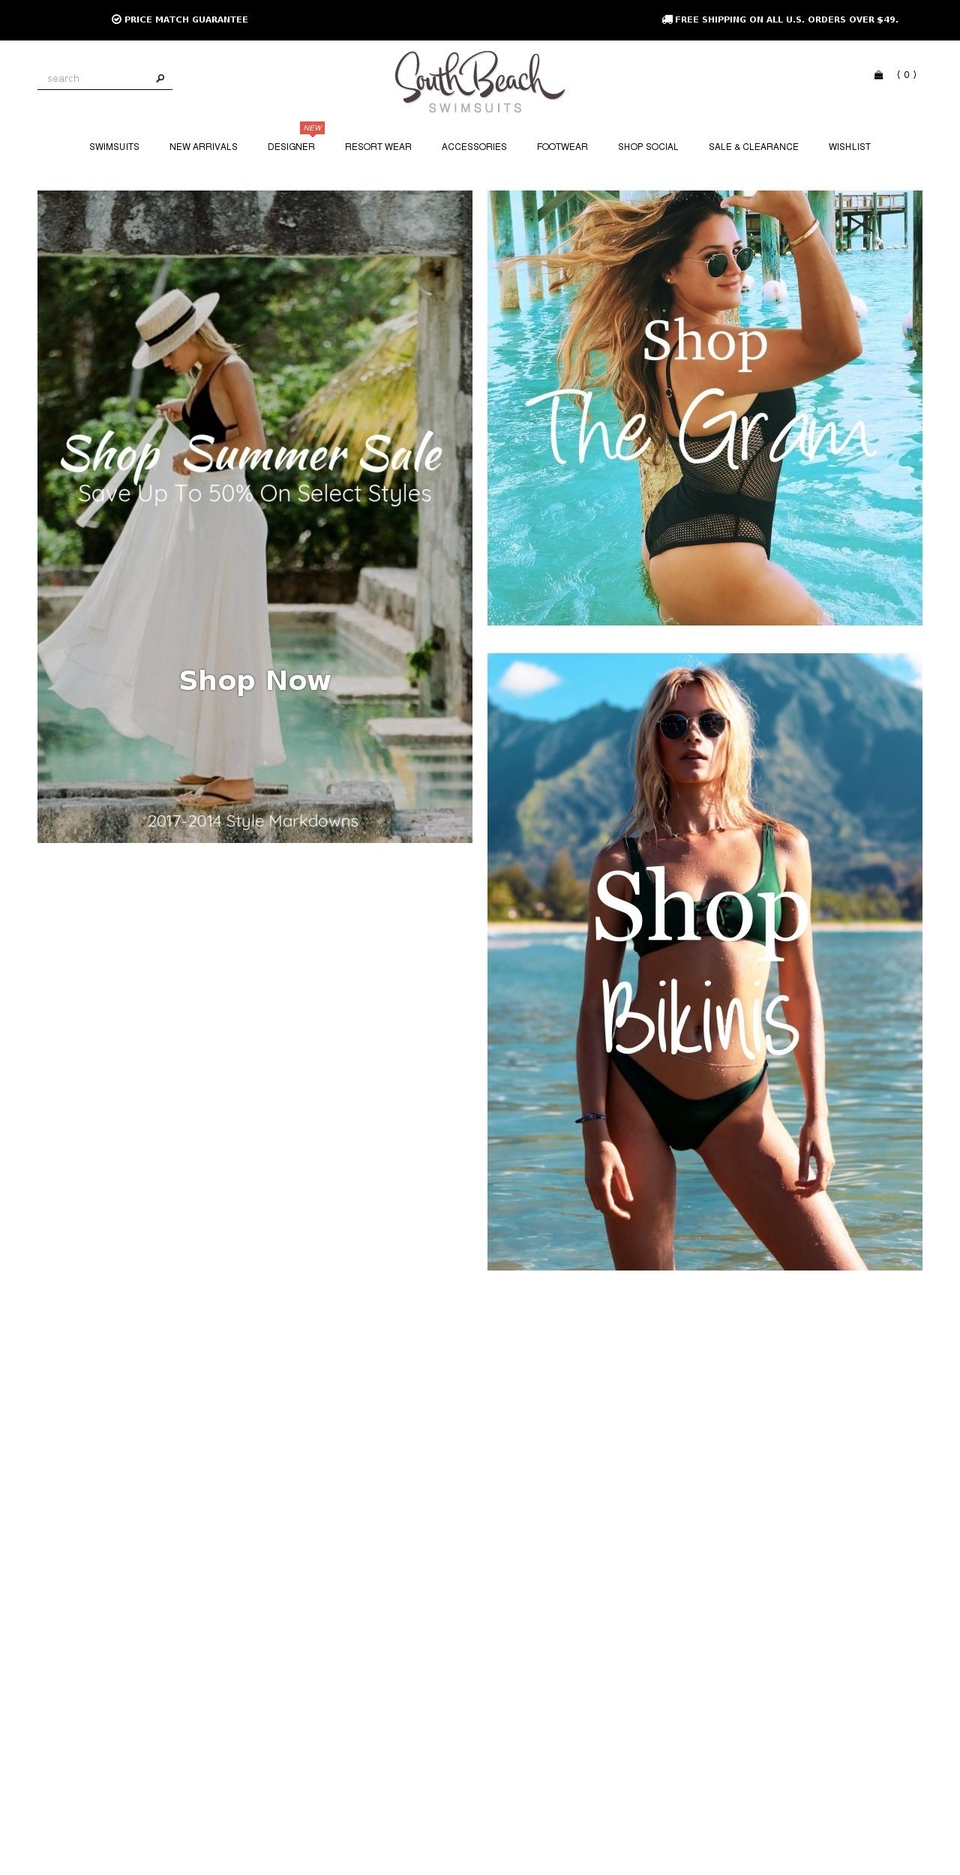 Made With ❤ By Minion Made - Updated Checkout Shopify theme site example southbeachbathingsuits.com